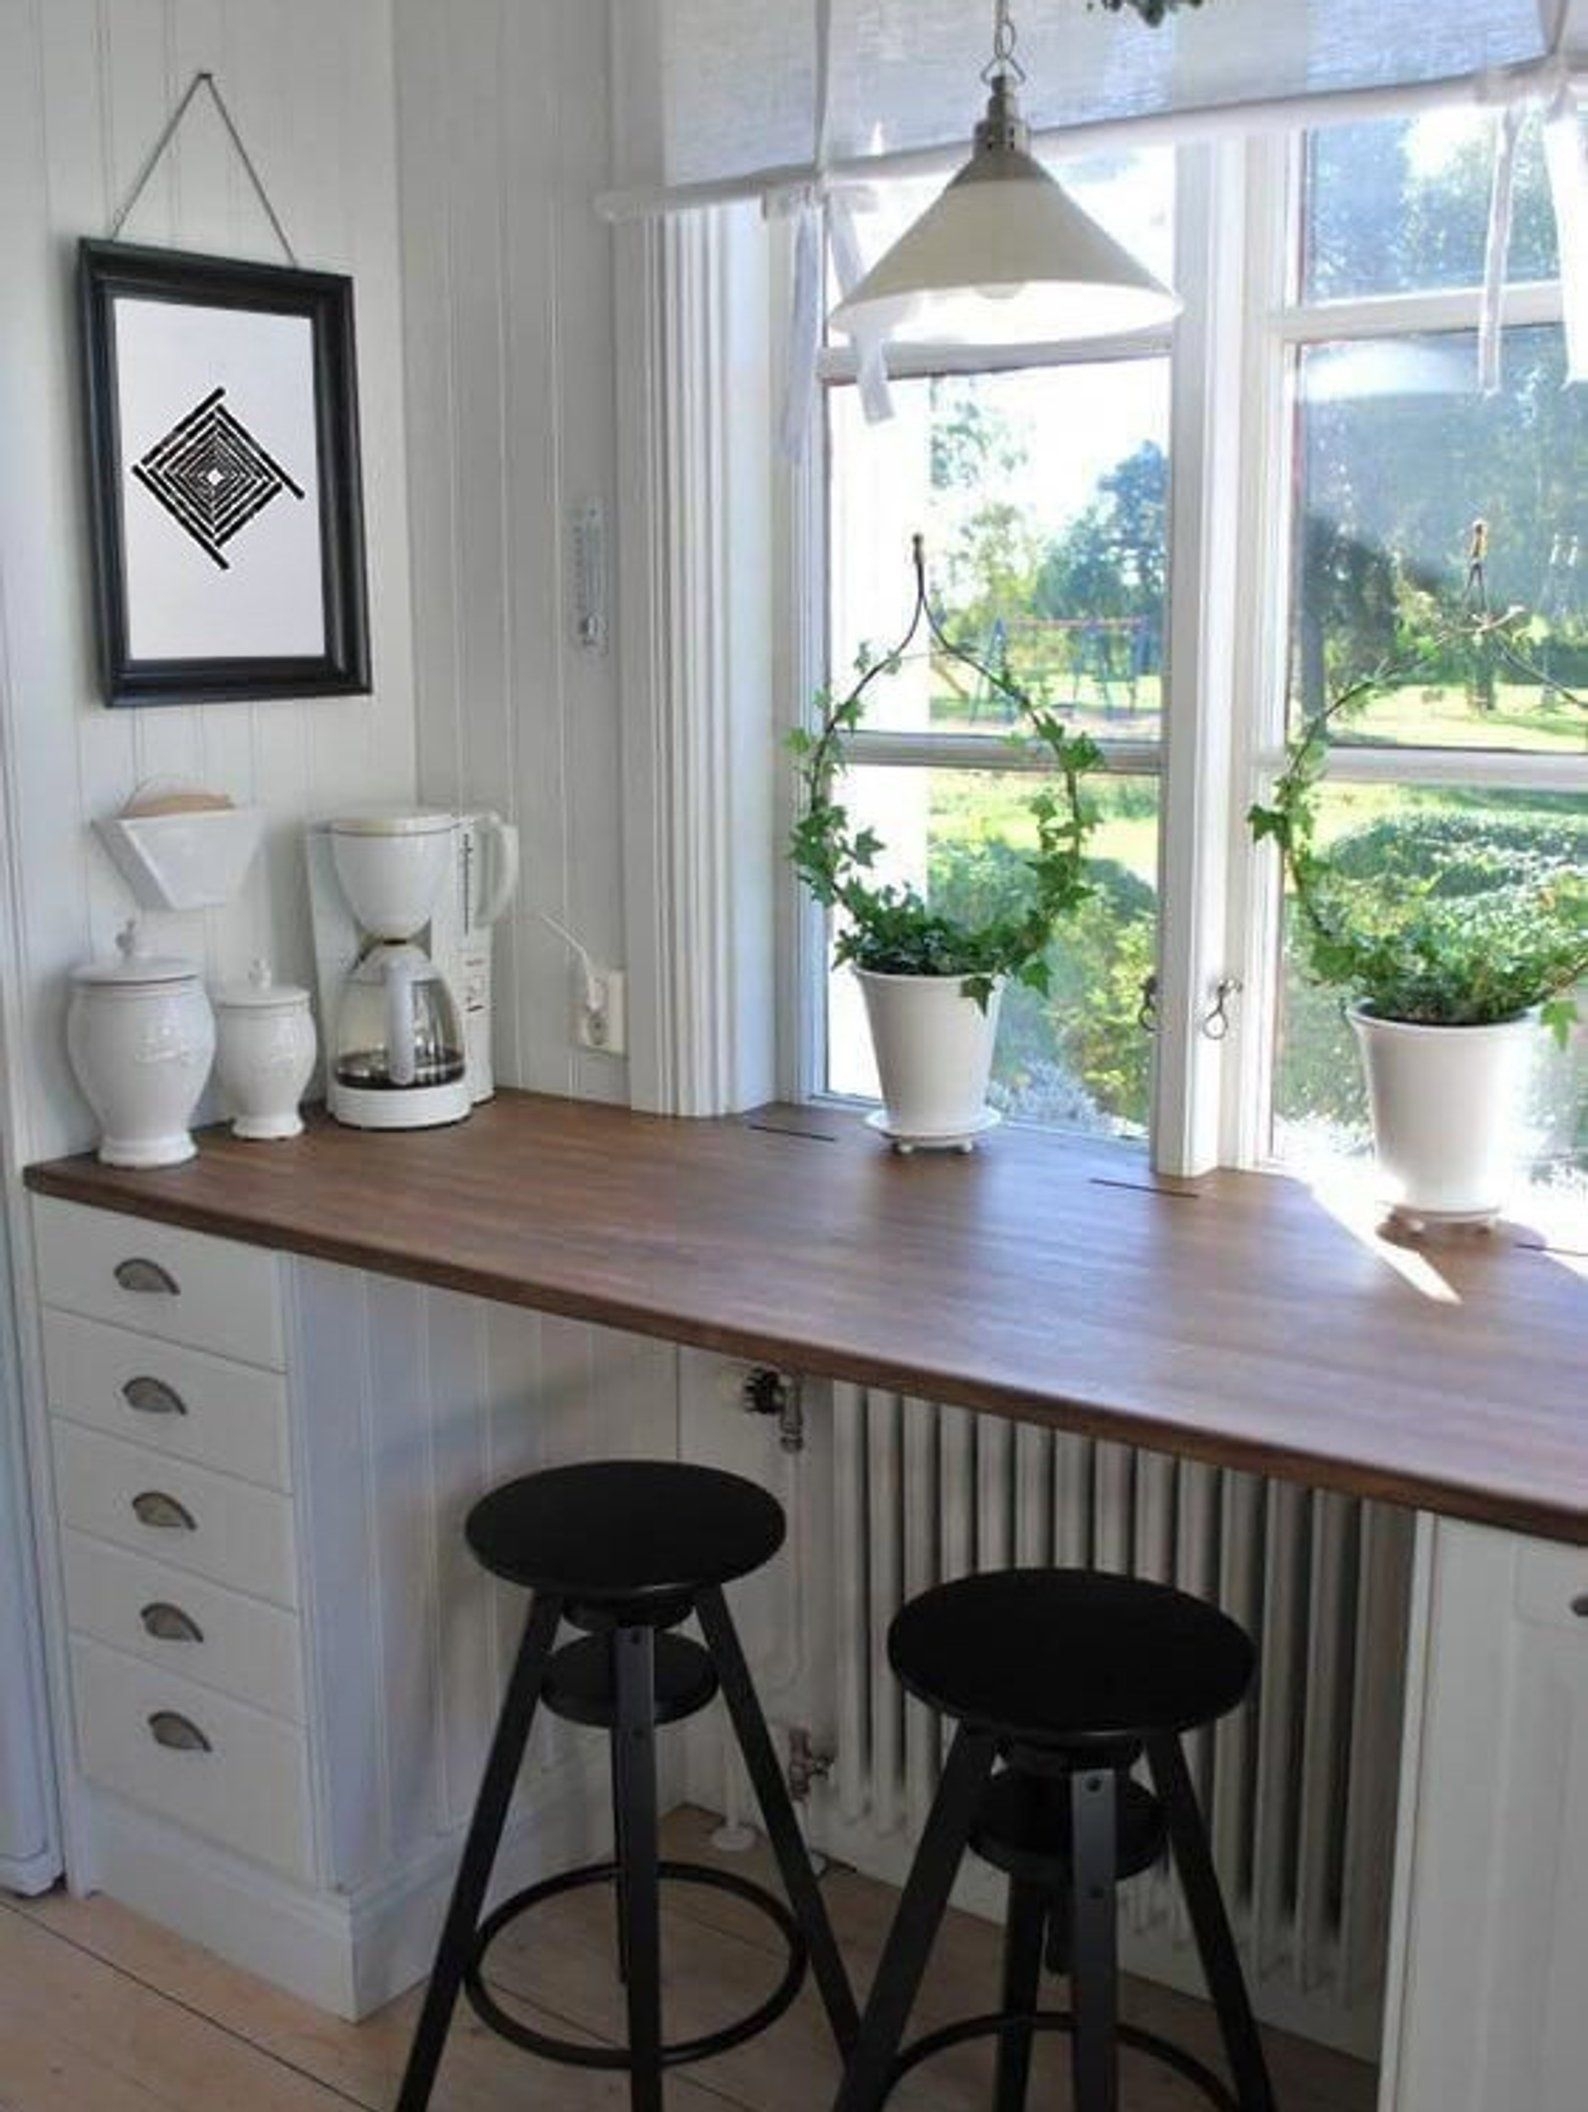 Portable Kitchen Islands With Breakfast Bar - Foter